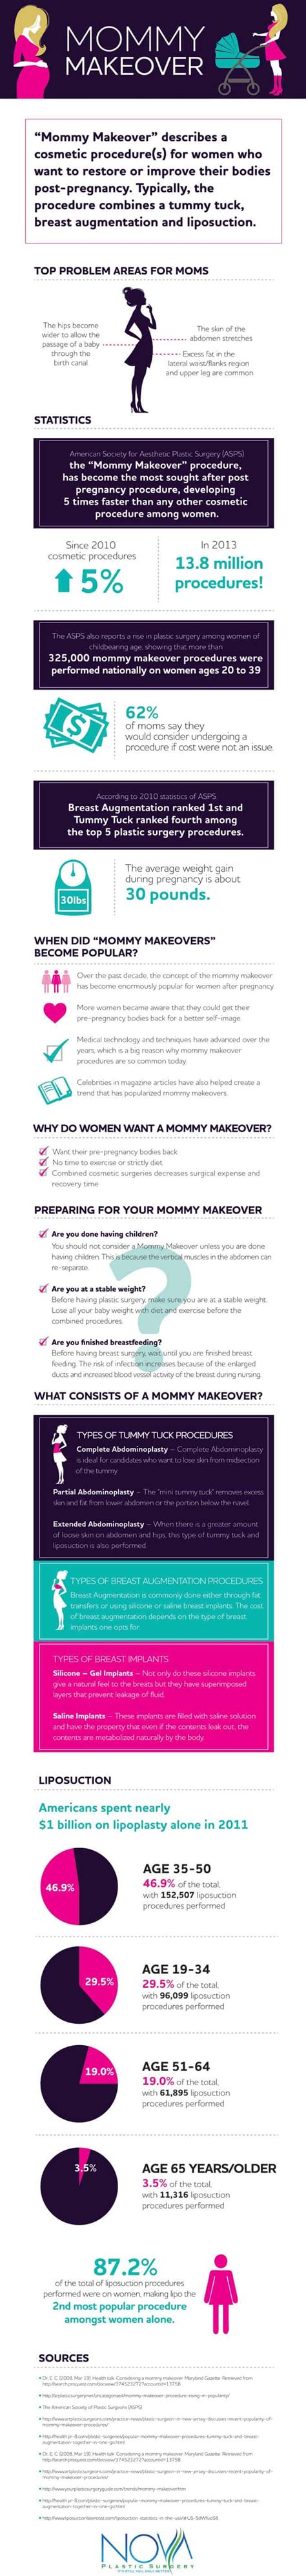 Infographic About Mommy Makeover In Northern Va